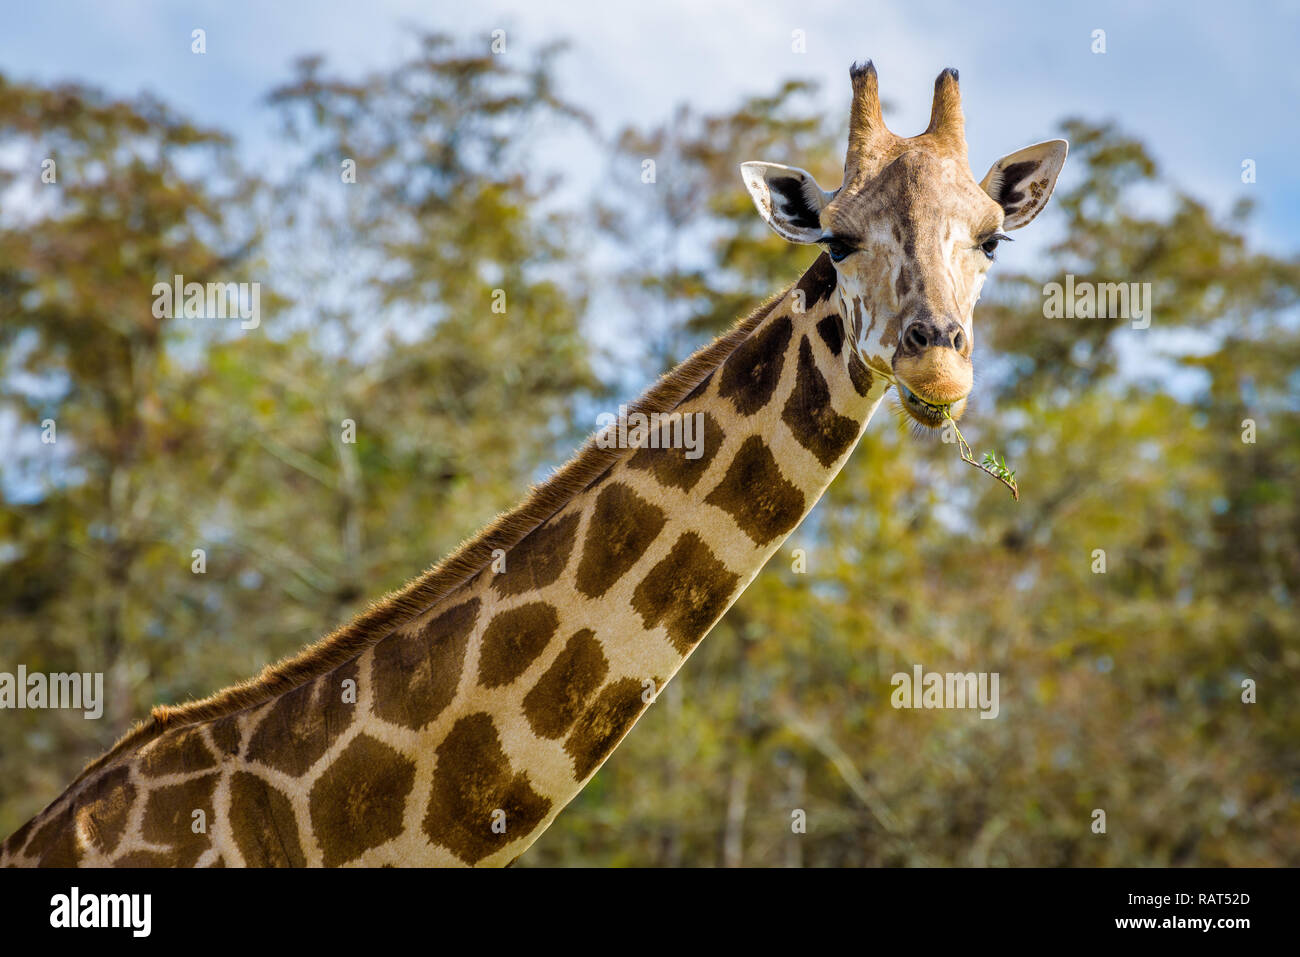 Close up portrait of a funny giraffe eating, isolated against the blue sky. Stock Photo